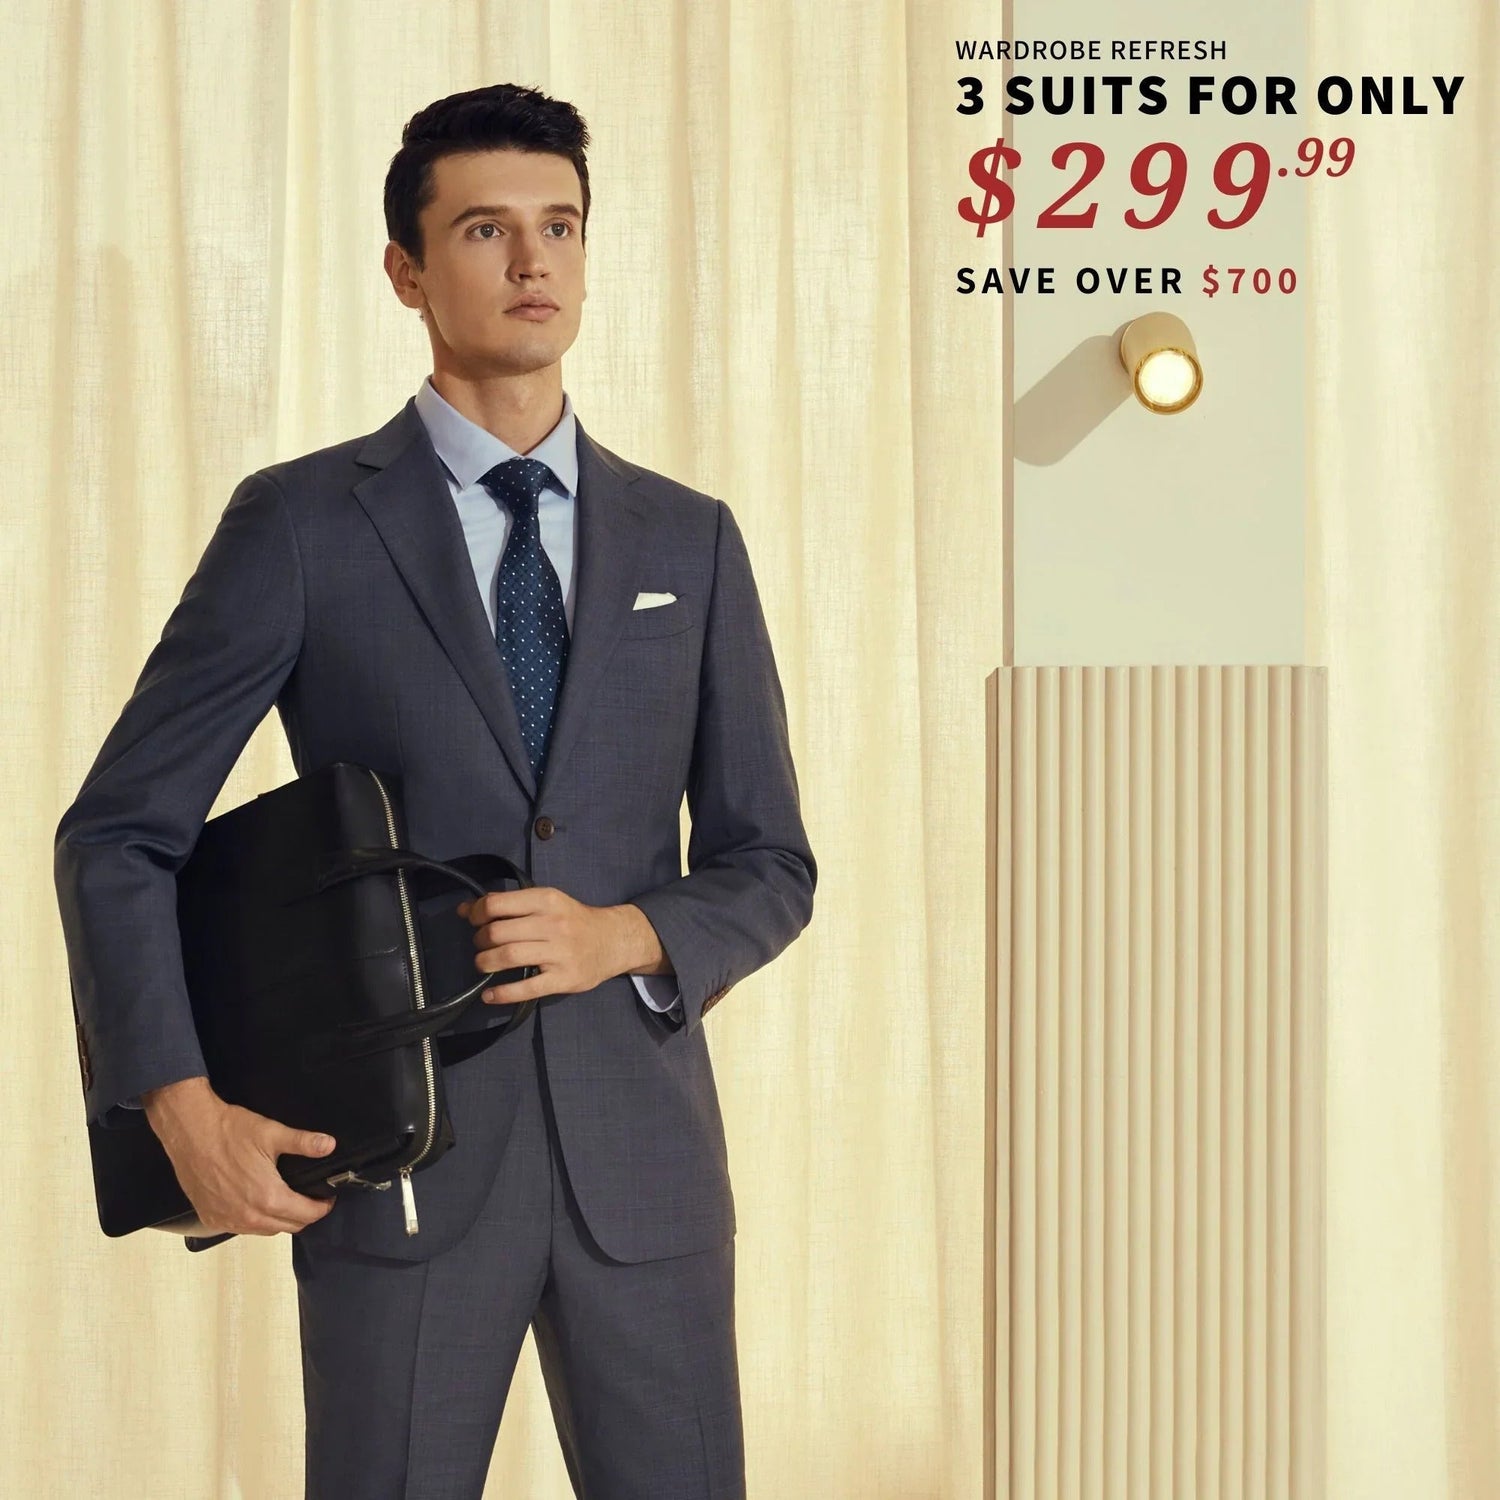 A man in a suit is holding a briefcase, dressed in a BYOB 3 Suits for $299 suit jacket and pants.